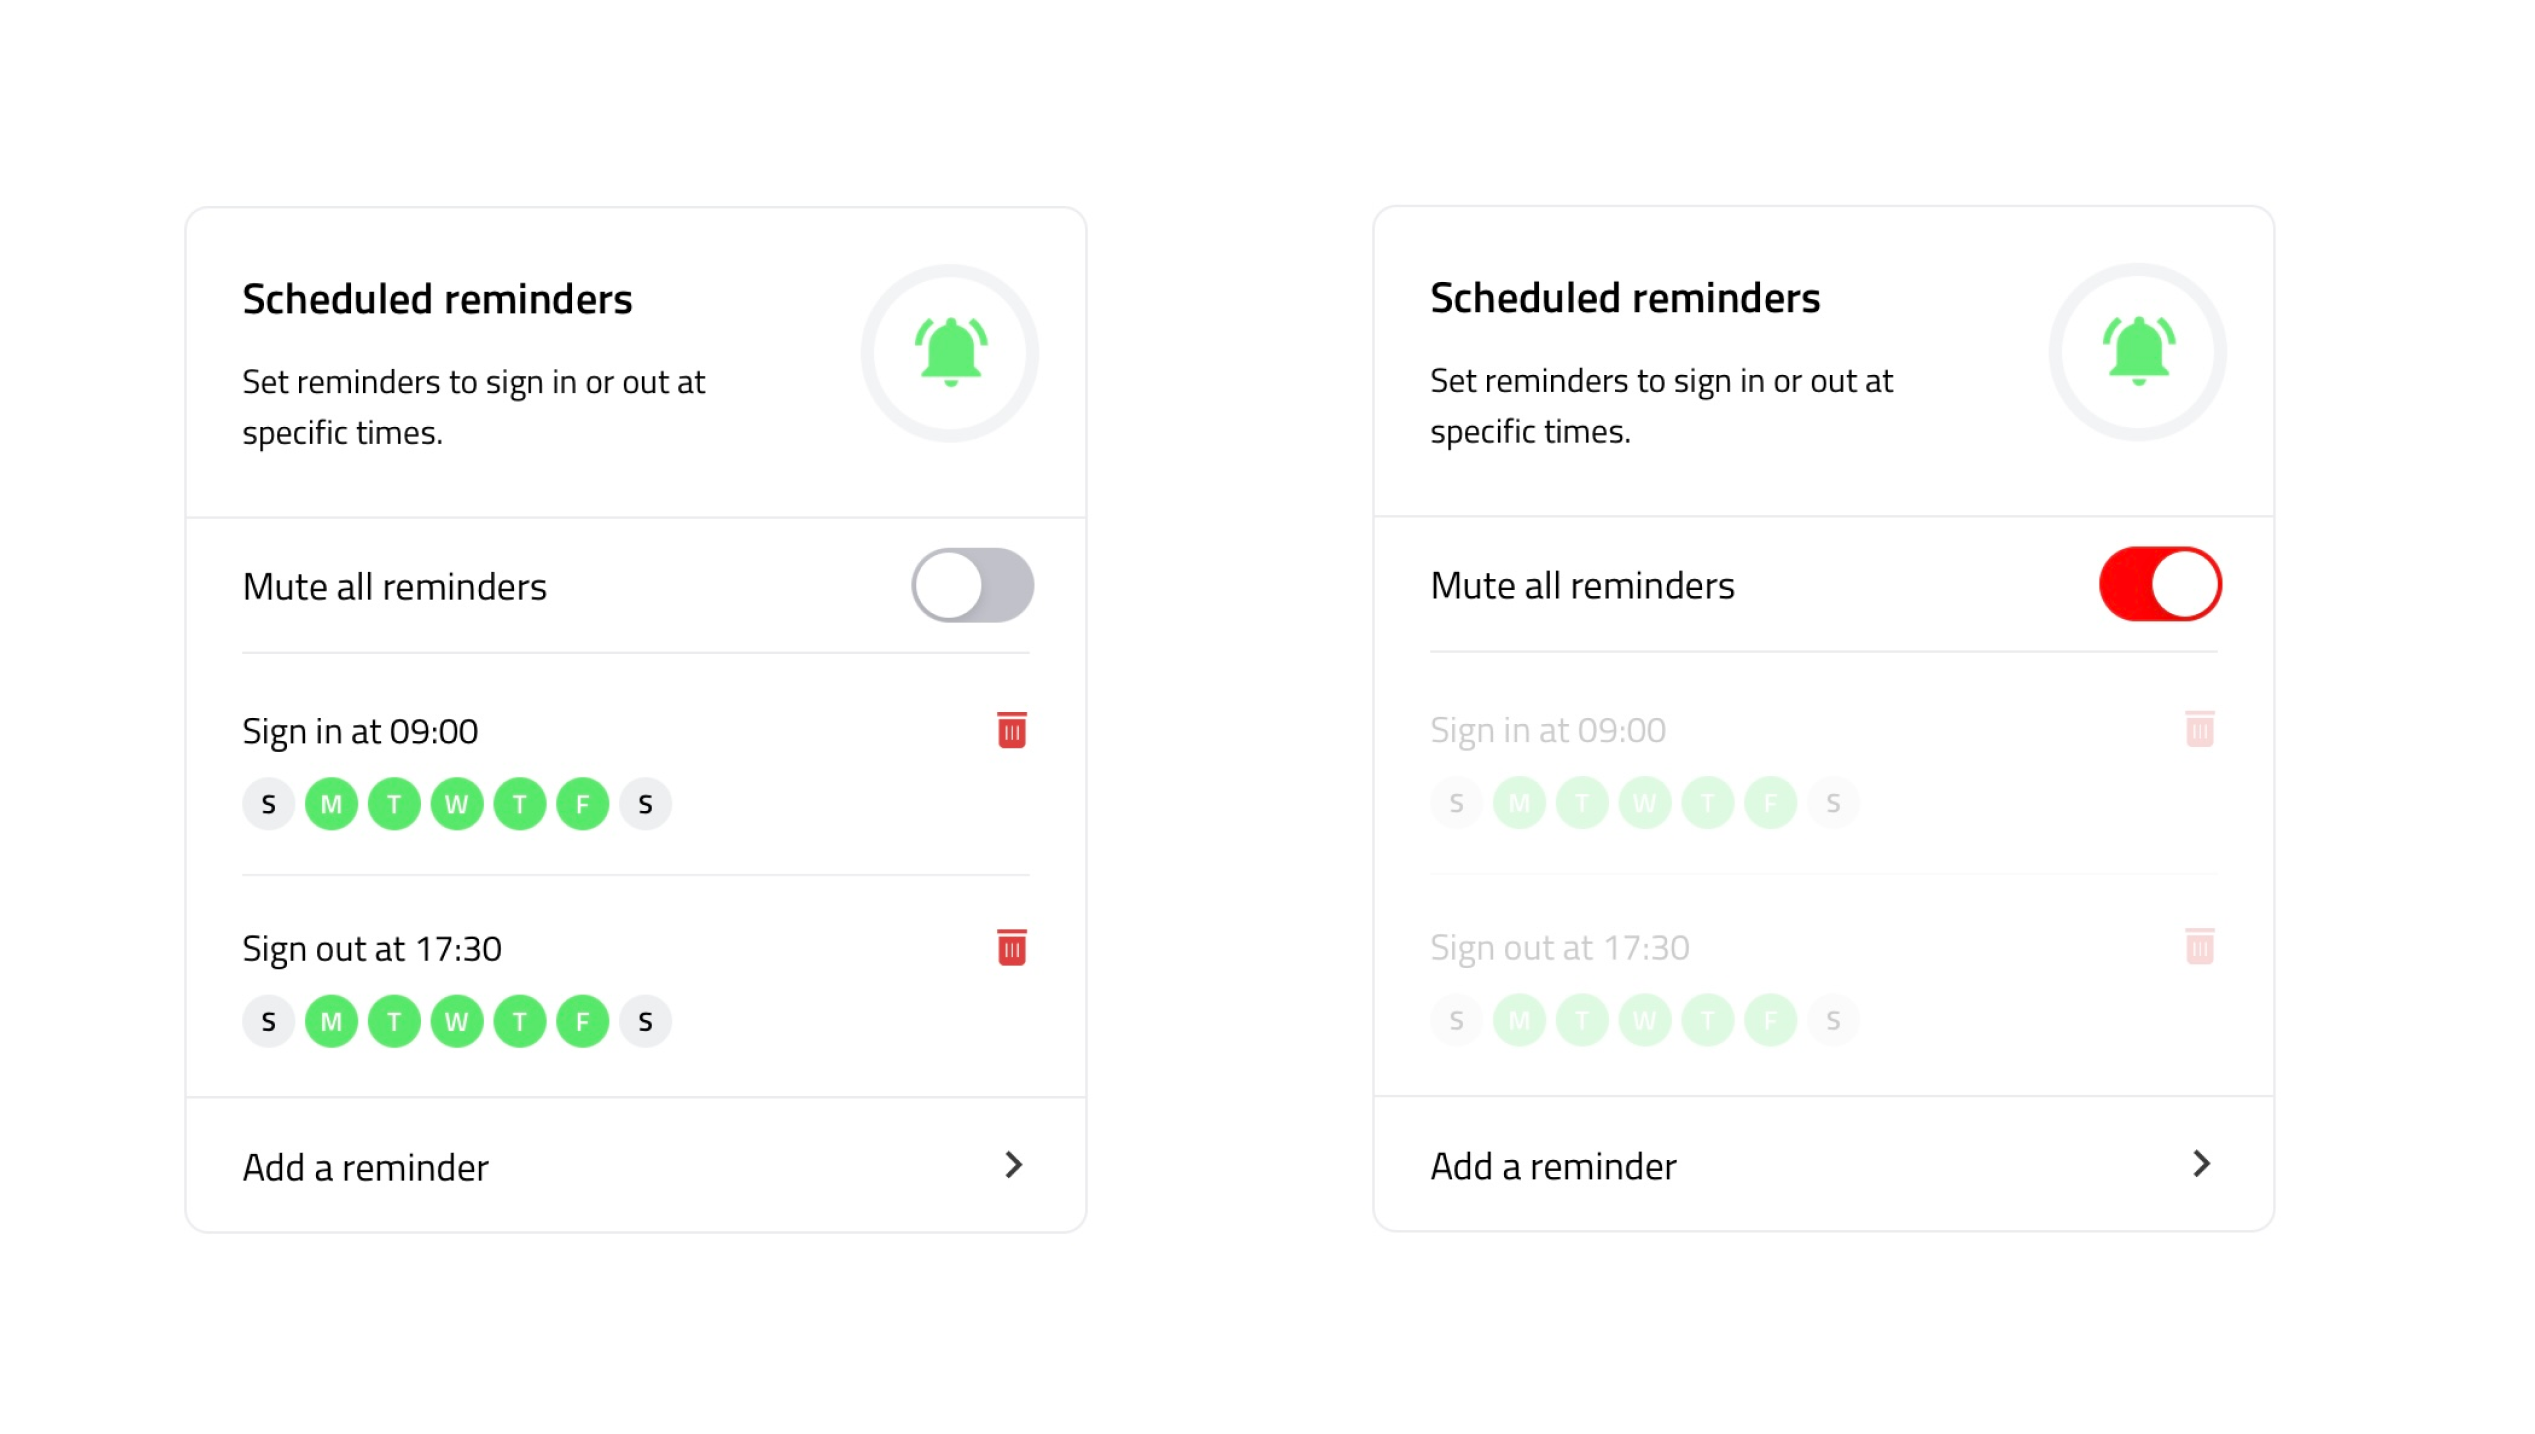 Screenshot of the scheduled reminders section of Companion app